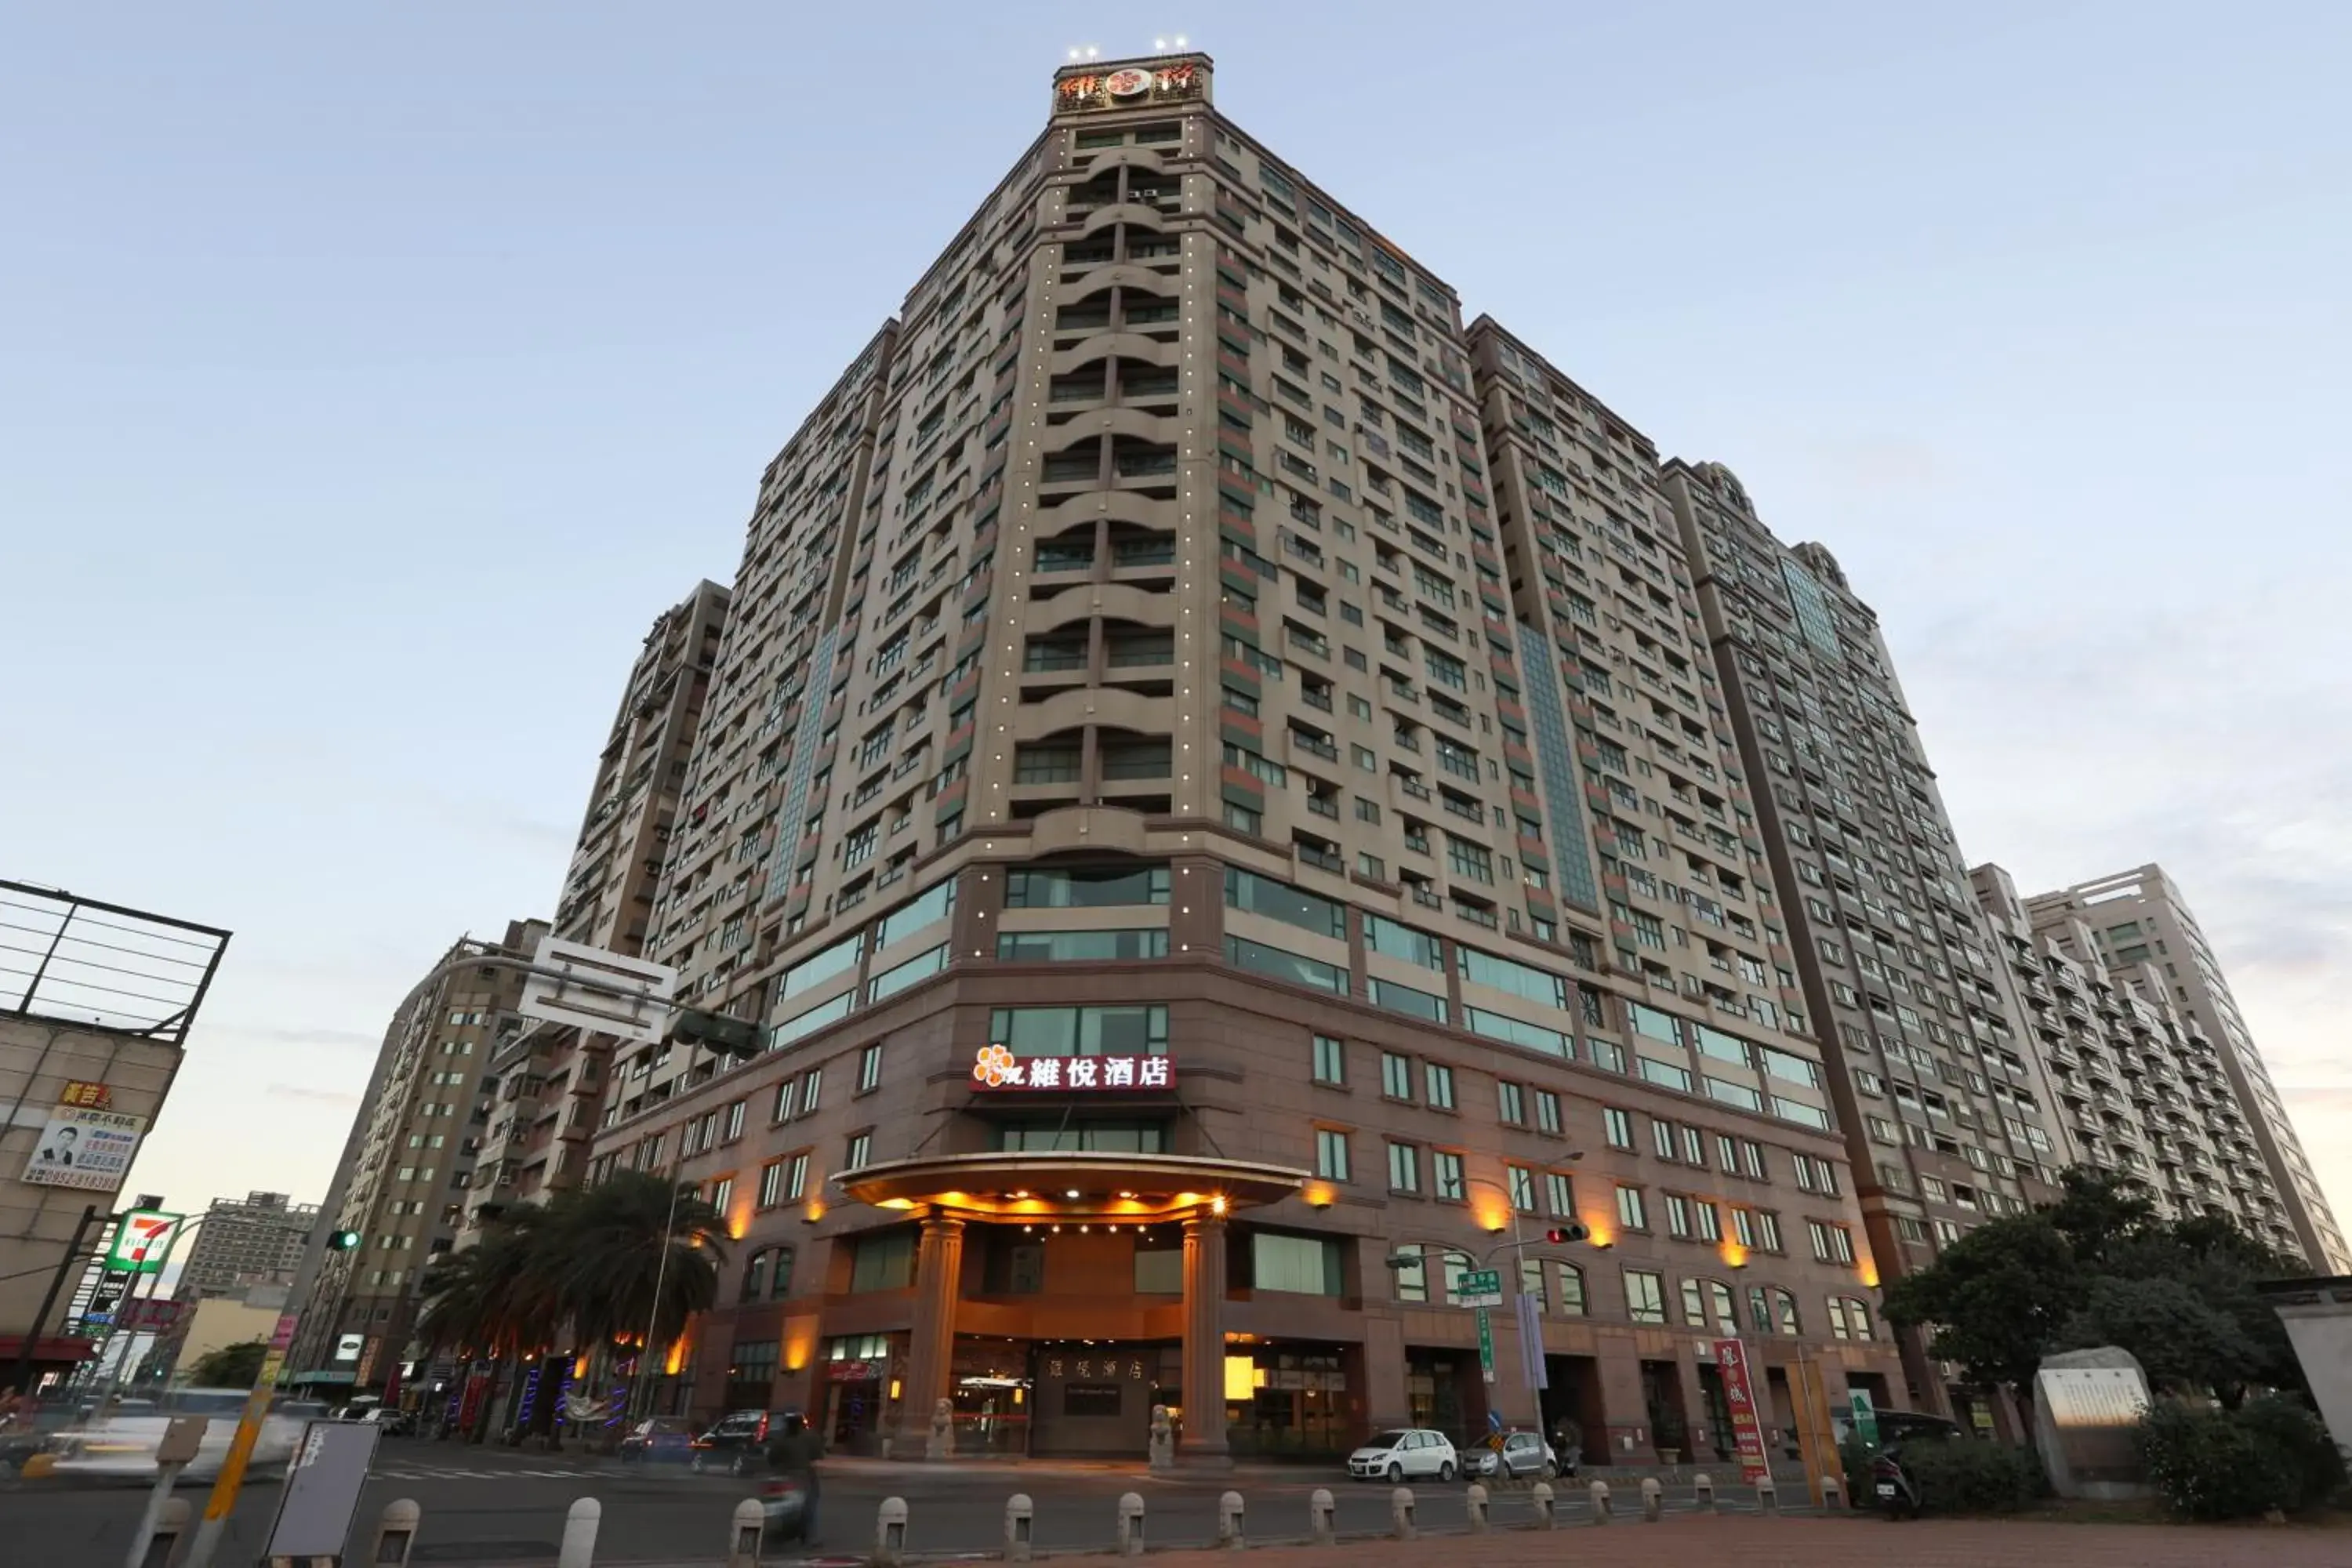 Property Building in Wei-Yat Grand Hotel